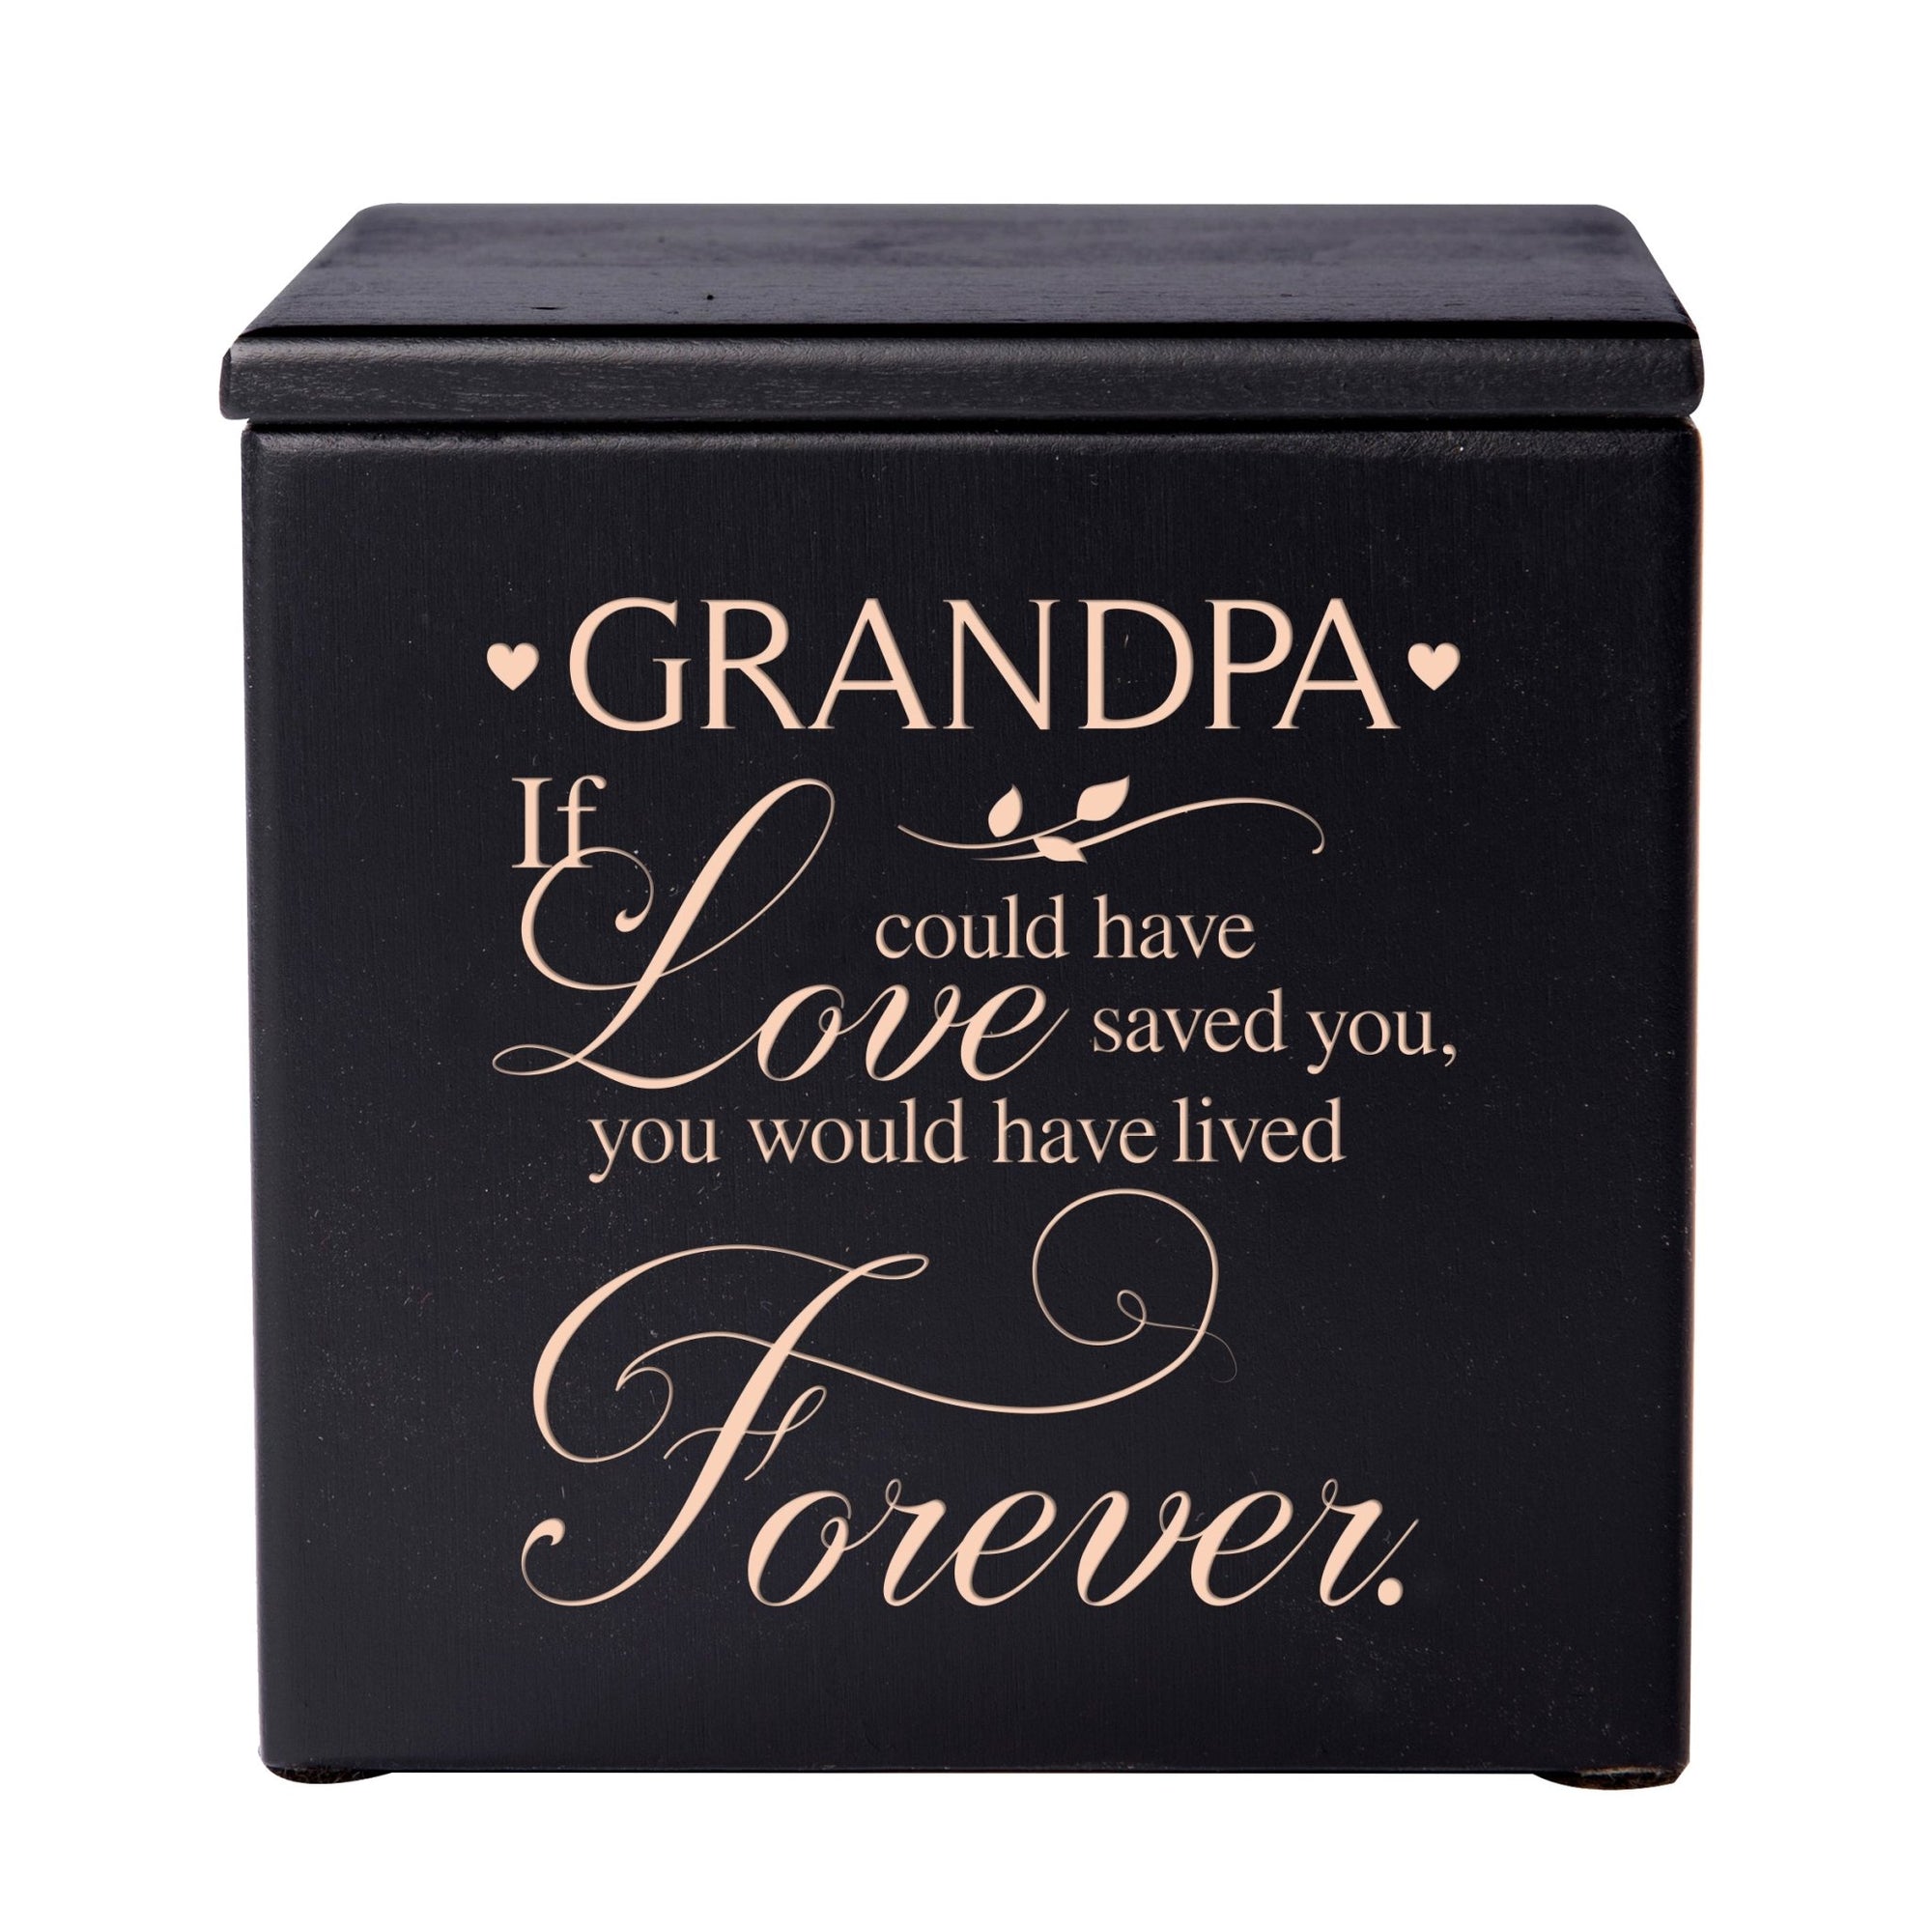 Modern Inspirational Memorial Wooden Cremation Urn Box 4.5x4.5in Holds 49 Cu Inches Of Human Ashes (If love could have saved Grandpa) Funeral and Commemorative Keepsake - LifeSong Milestones